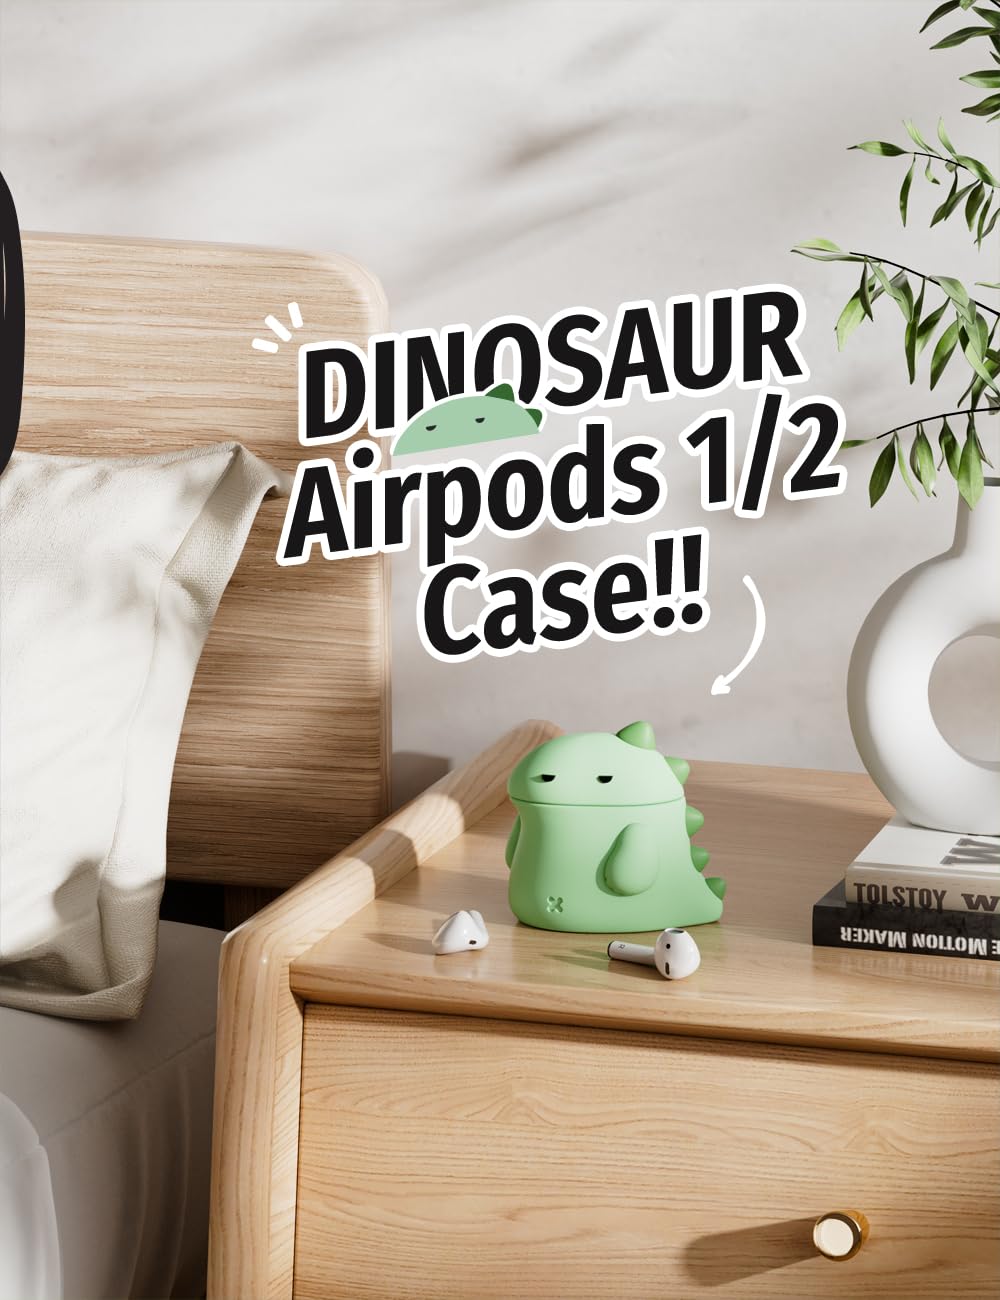 ELETIUO Case Compatible with Apple Airpods 1st&2nd Generation, Unique Soft Silicone Skin Charging Case Cartoon Cute Dinosaur Design Protective Cover for Girls Kids and Women Men,Green